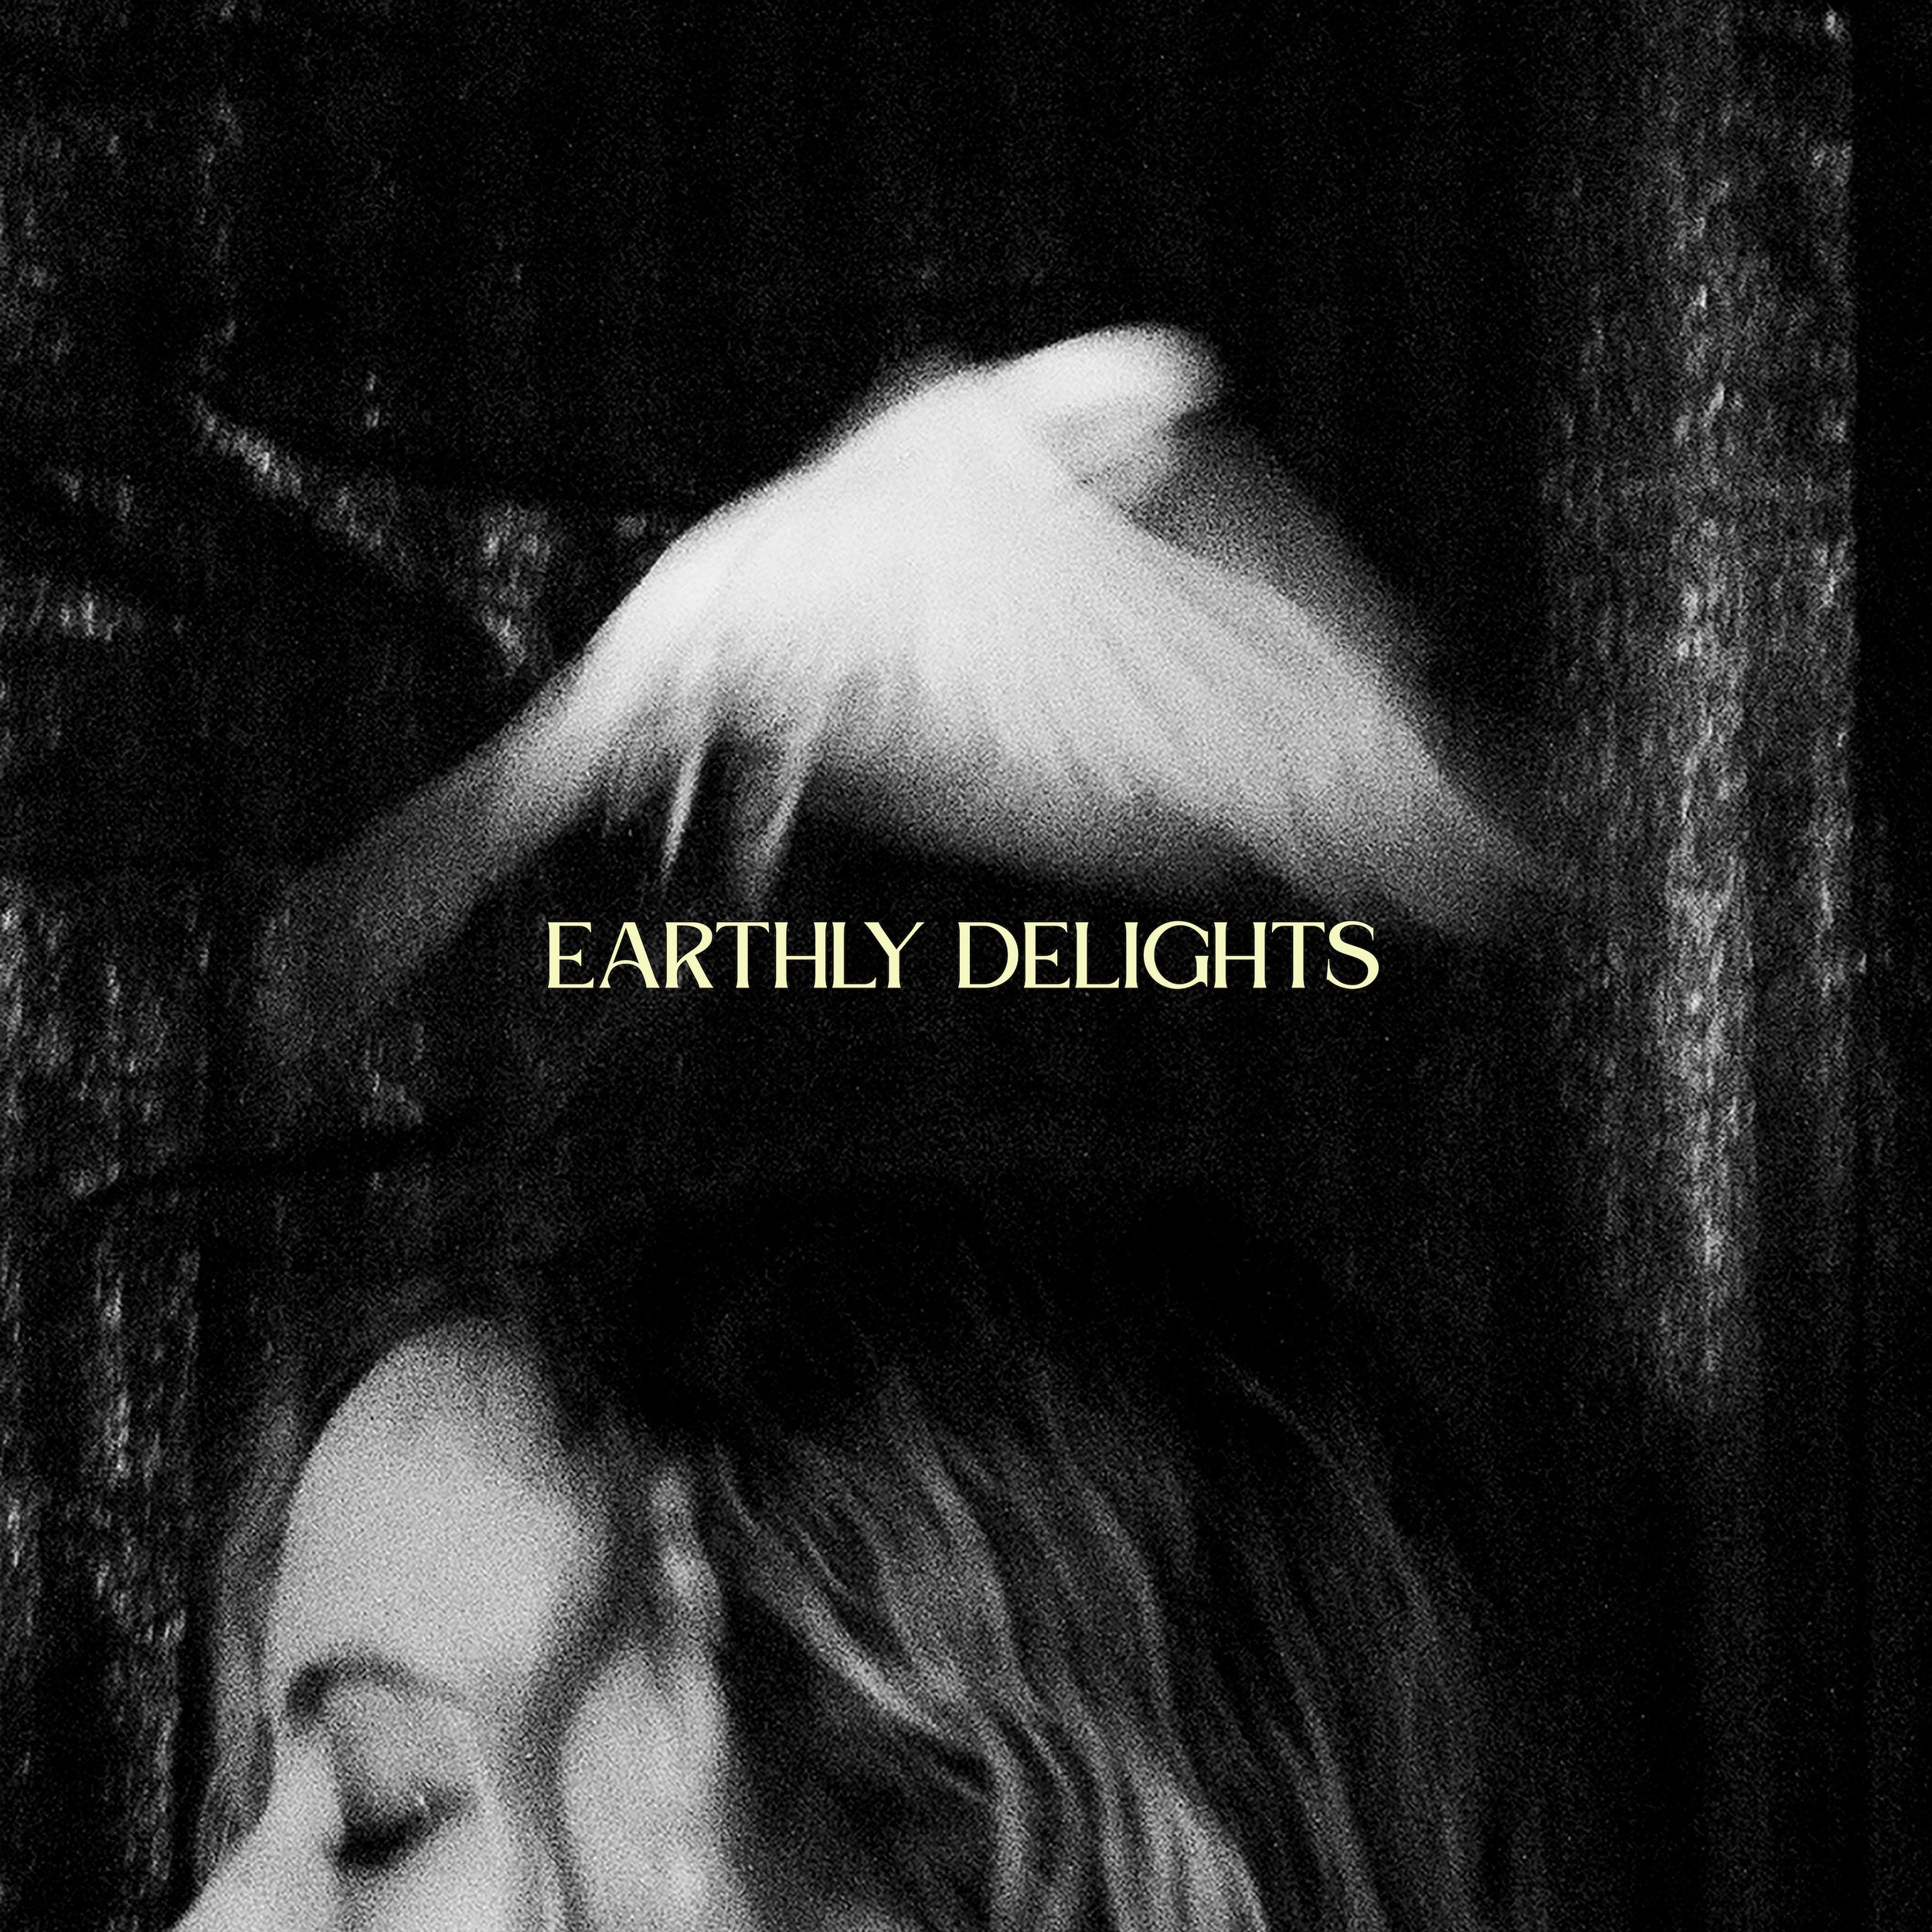 Zilched - Earthly Delights – $1.00